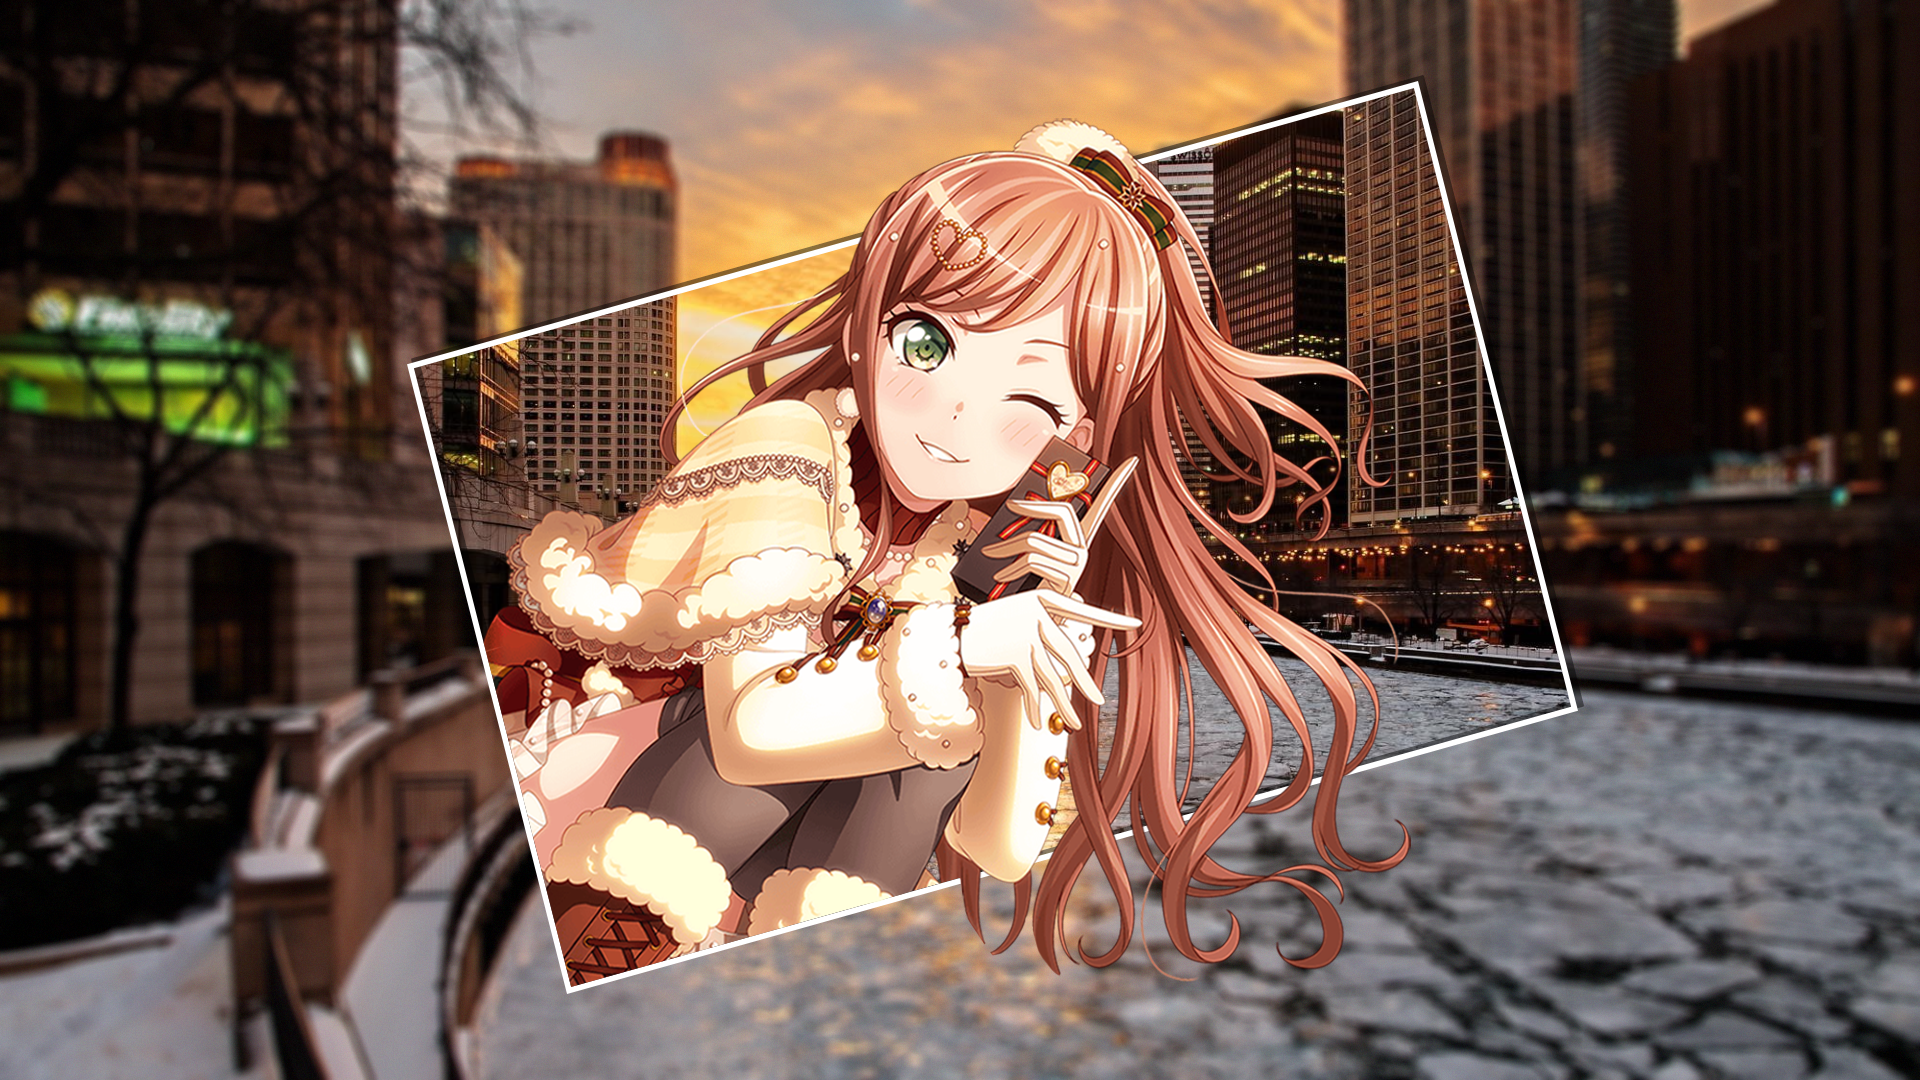 Anime 1920x1080 BanG Dream! Imai Lisa winter river city picture-in-picture